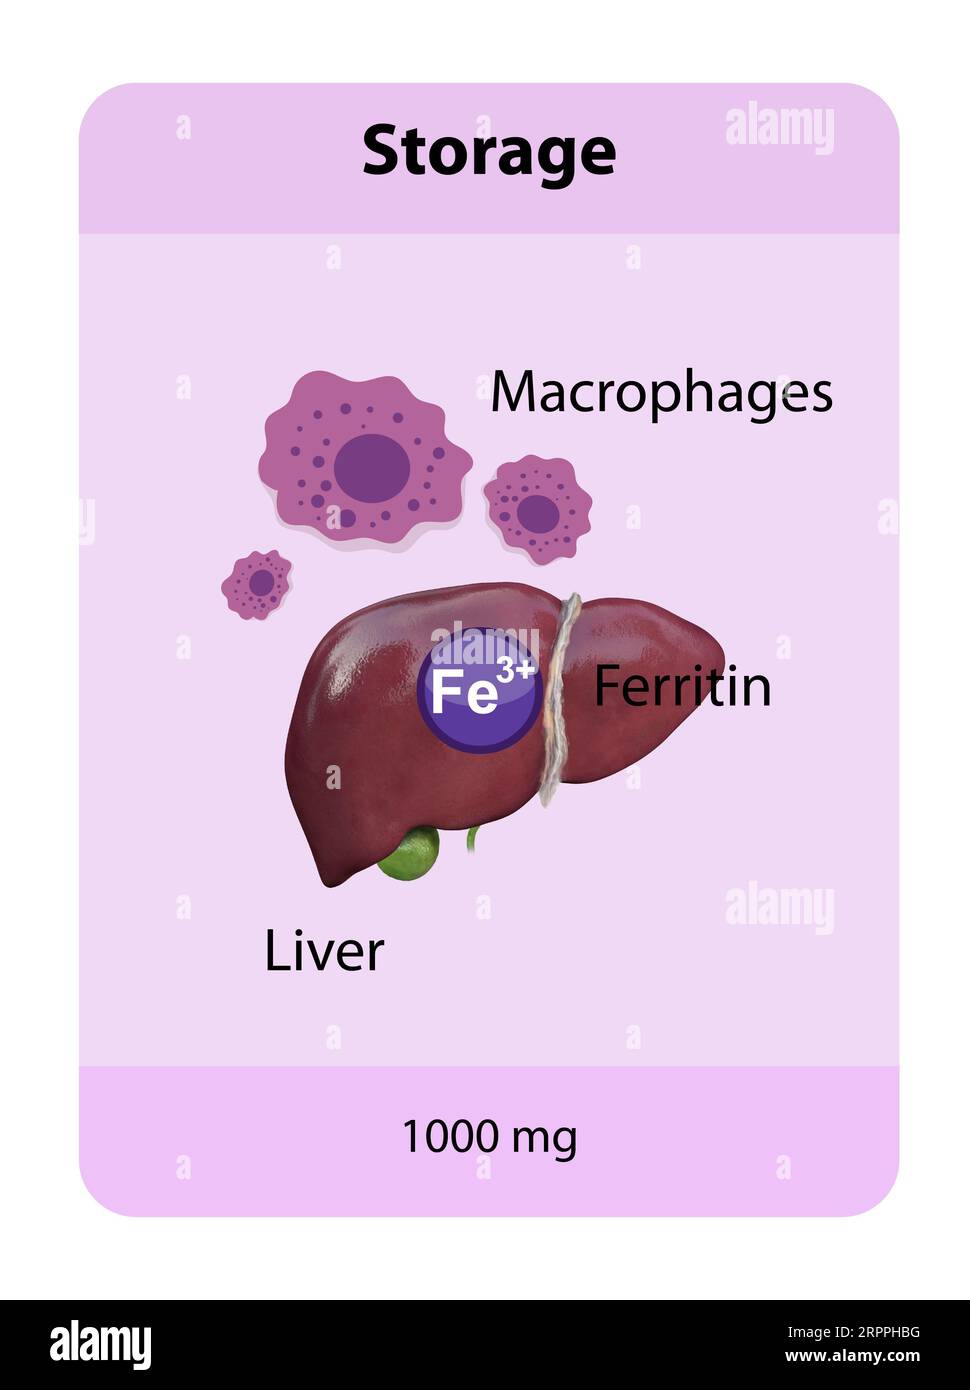 iron distribution in the body, iron storage, macrophages, iron penos, transferrin, 2d and 3d graphics, illustration Stock Photo